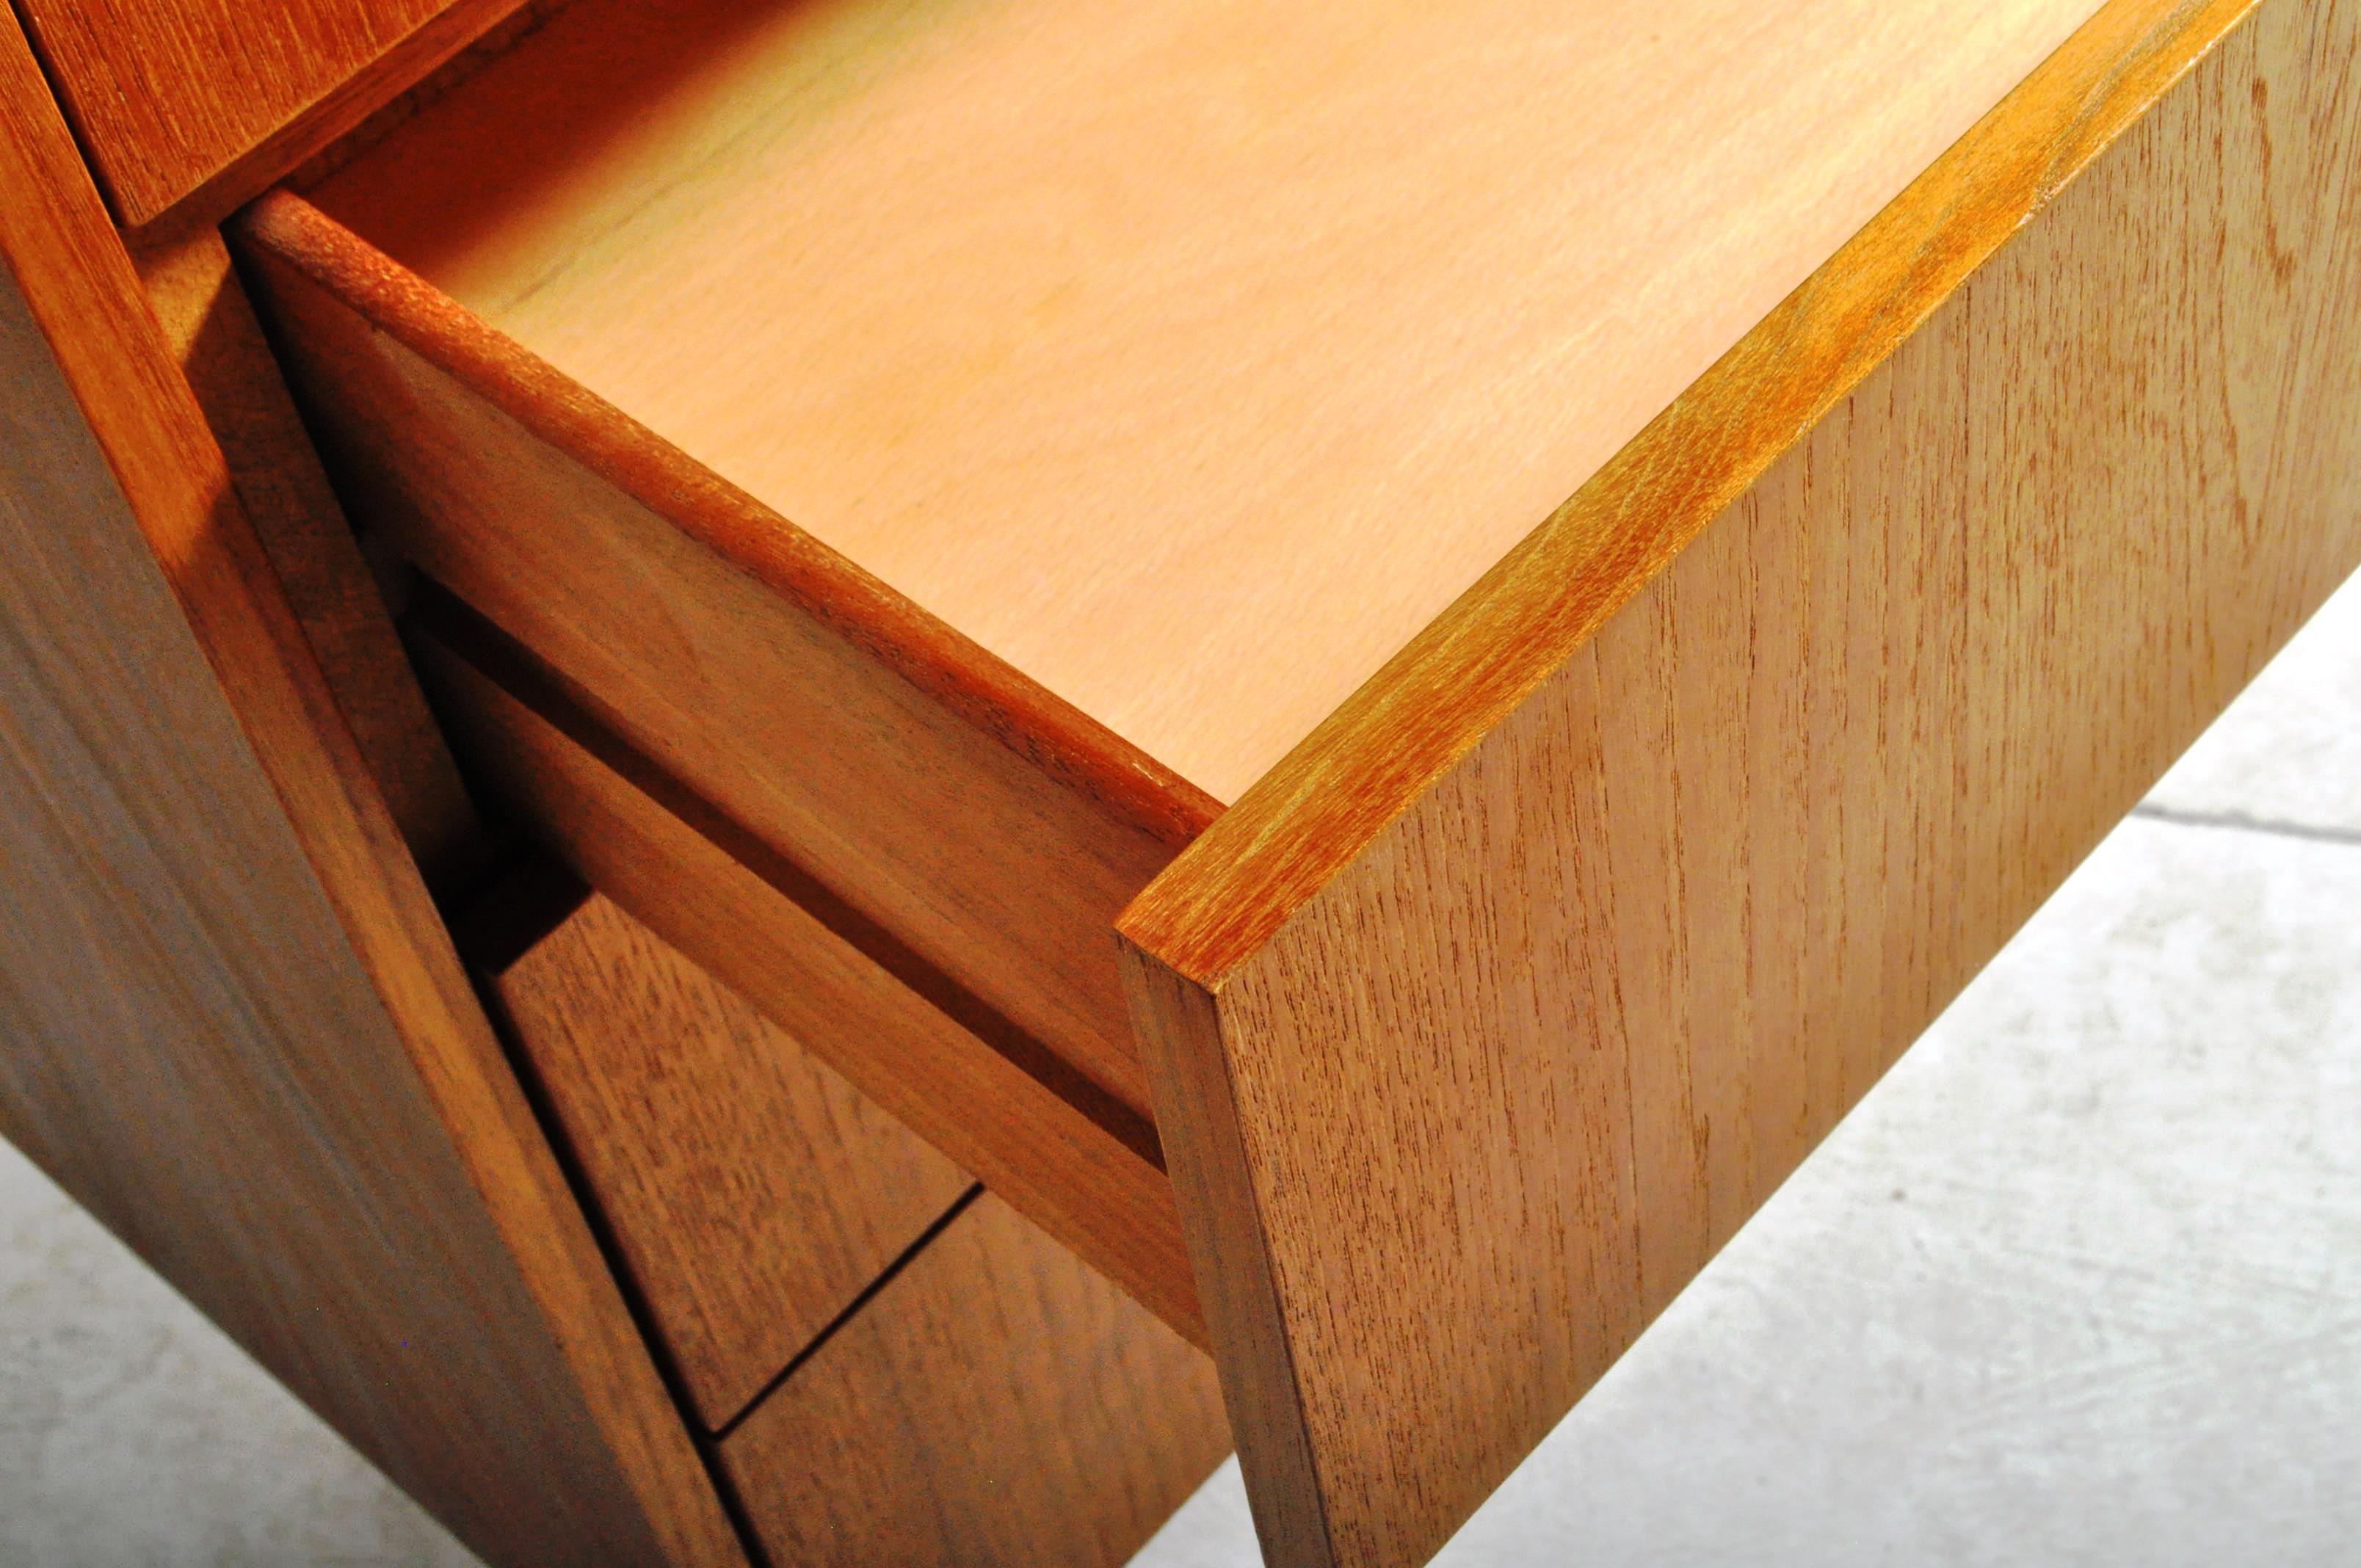 JENTIQUE - MID 20TH CENTURY TEAK CHEST OF DRAWERS - Image 5 of 8